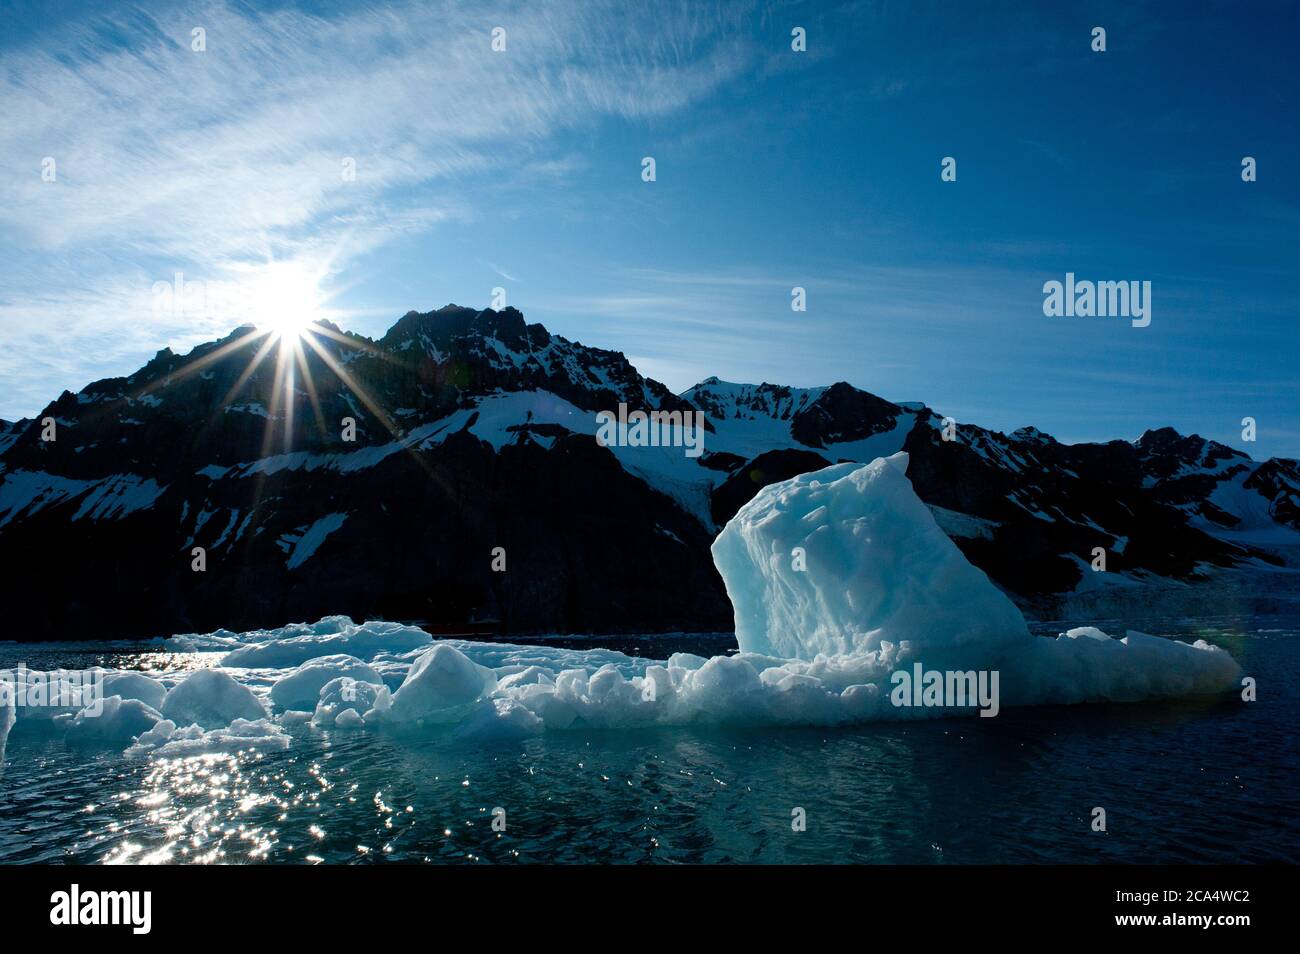 Backlit iceberg with sun starburst over snowy mountain as background shows lack of ice floes in fjord due to global warming climate crisis. Stock Photo